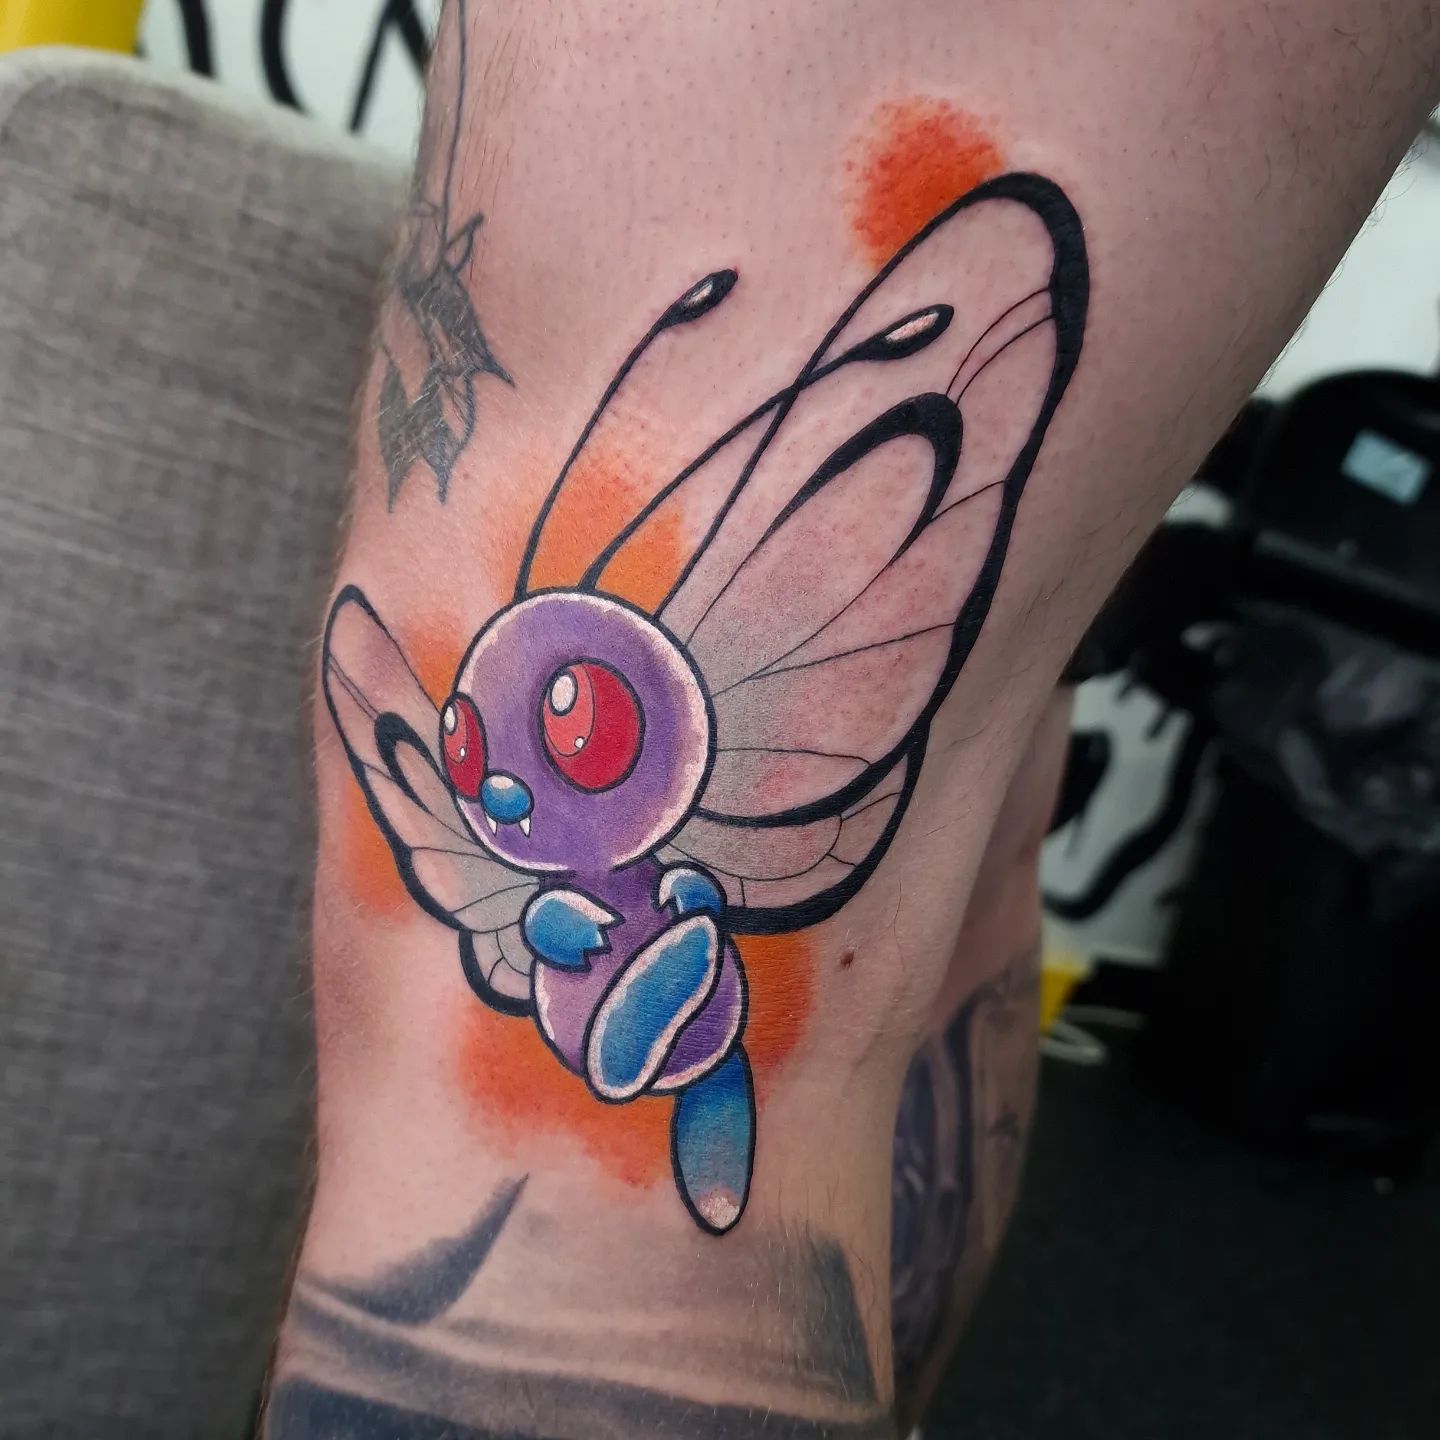 Are you someone who loves and lives for Pokemon? The truth is that it used to be all of our favorite cartoons. If you like fun ideas, butterflies, quirky prints, and cool knee tattoos, this may suit you. Butterfree used to be everyone’s favorite and bulletproof tattoo option. Wish to try it out?